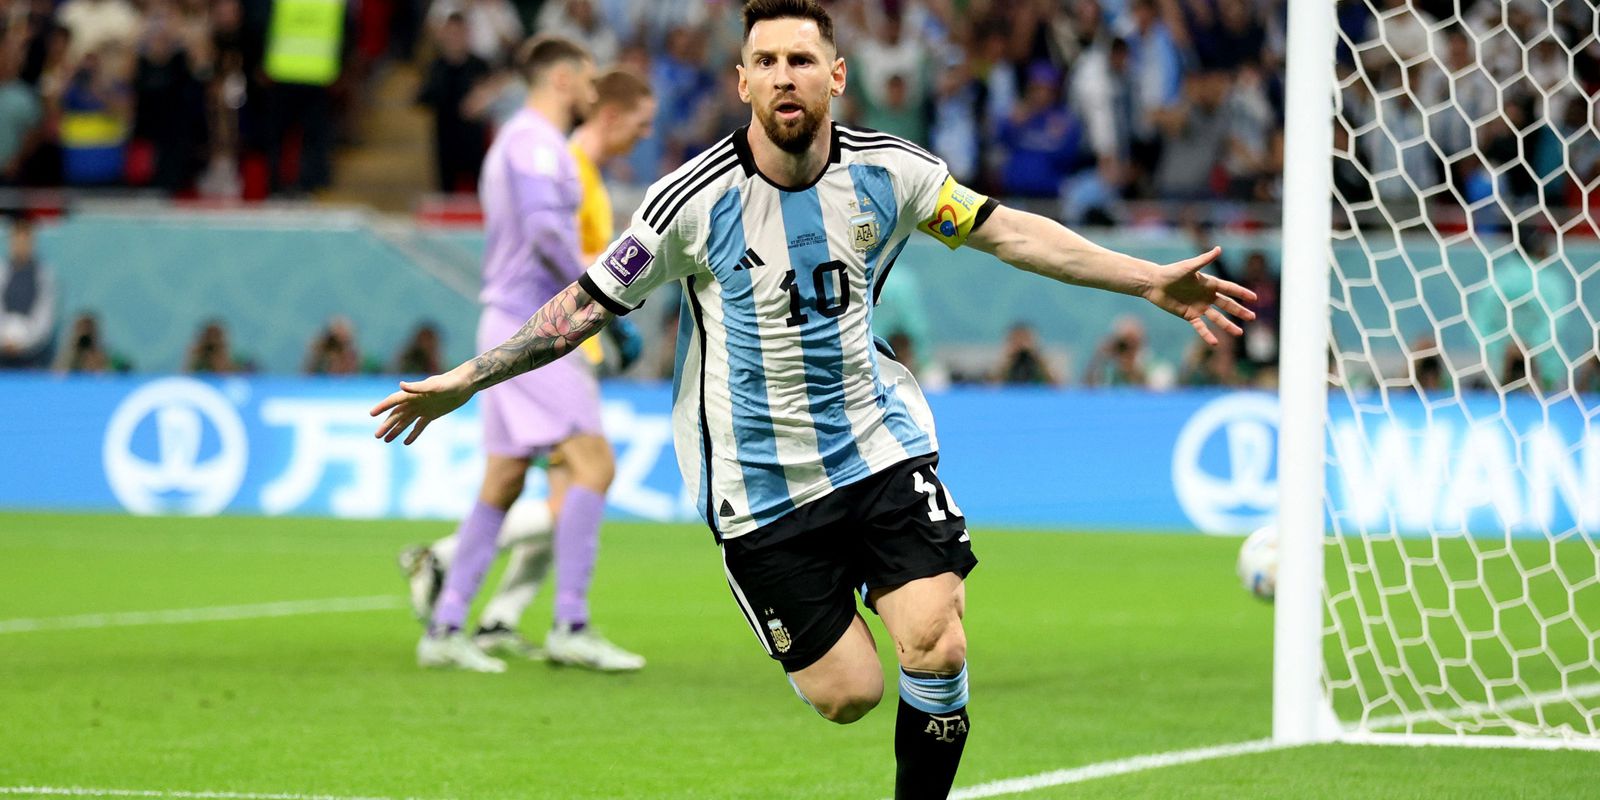 With drama, Argentina beats Australia and advances to face Holland